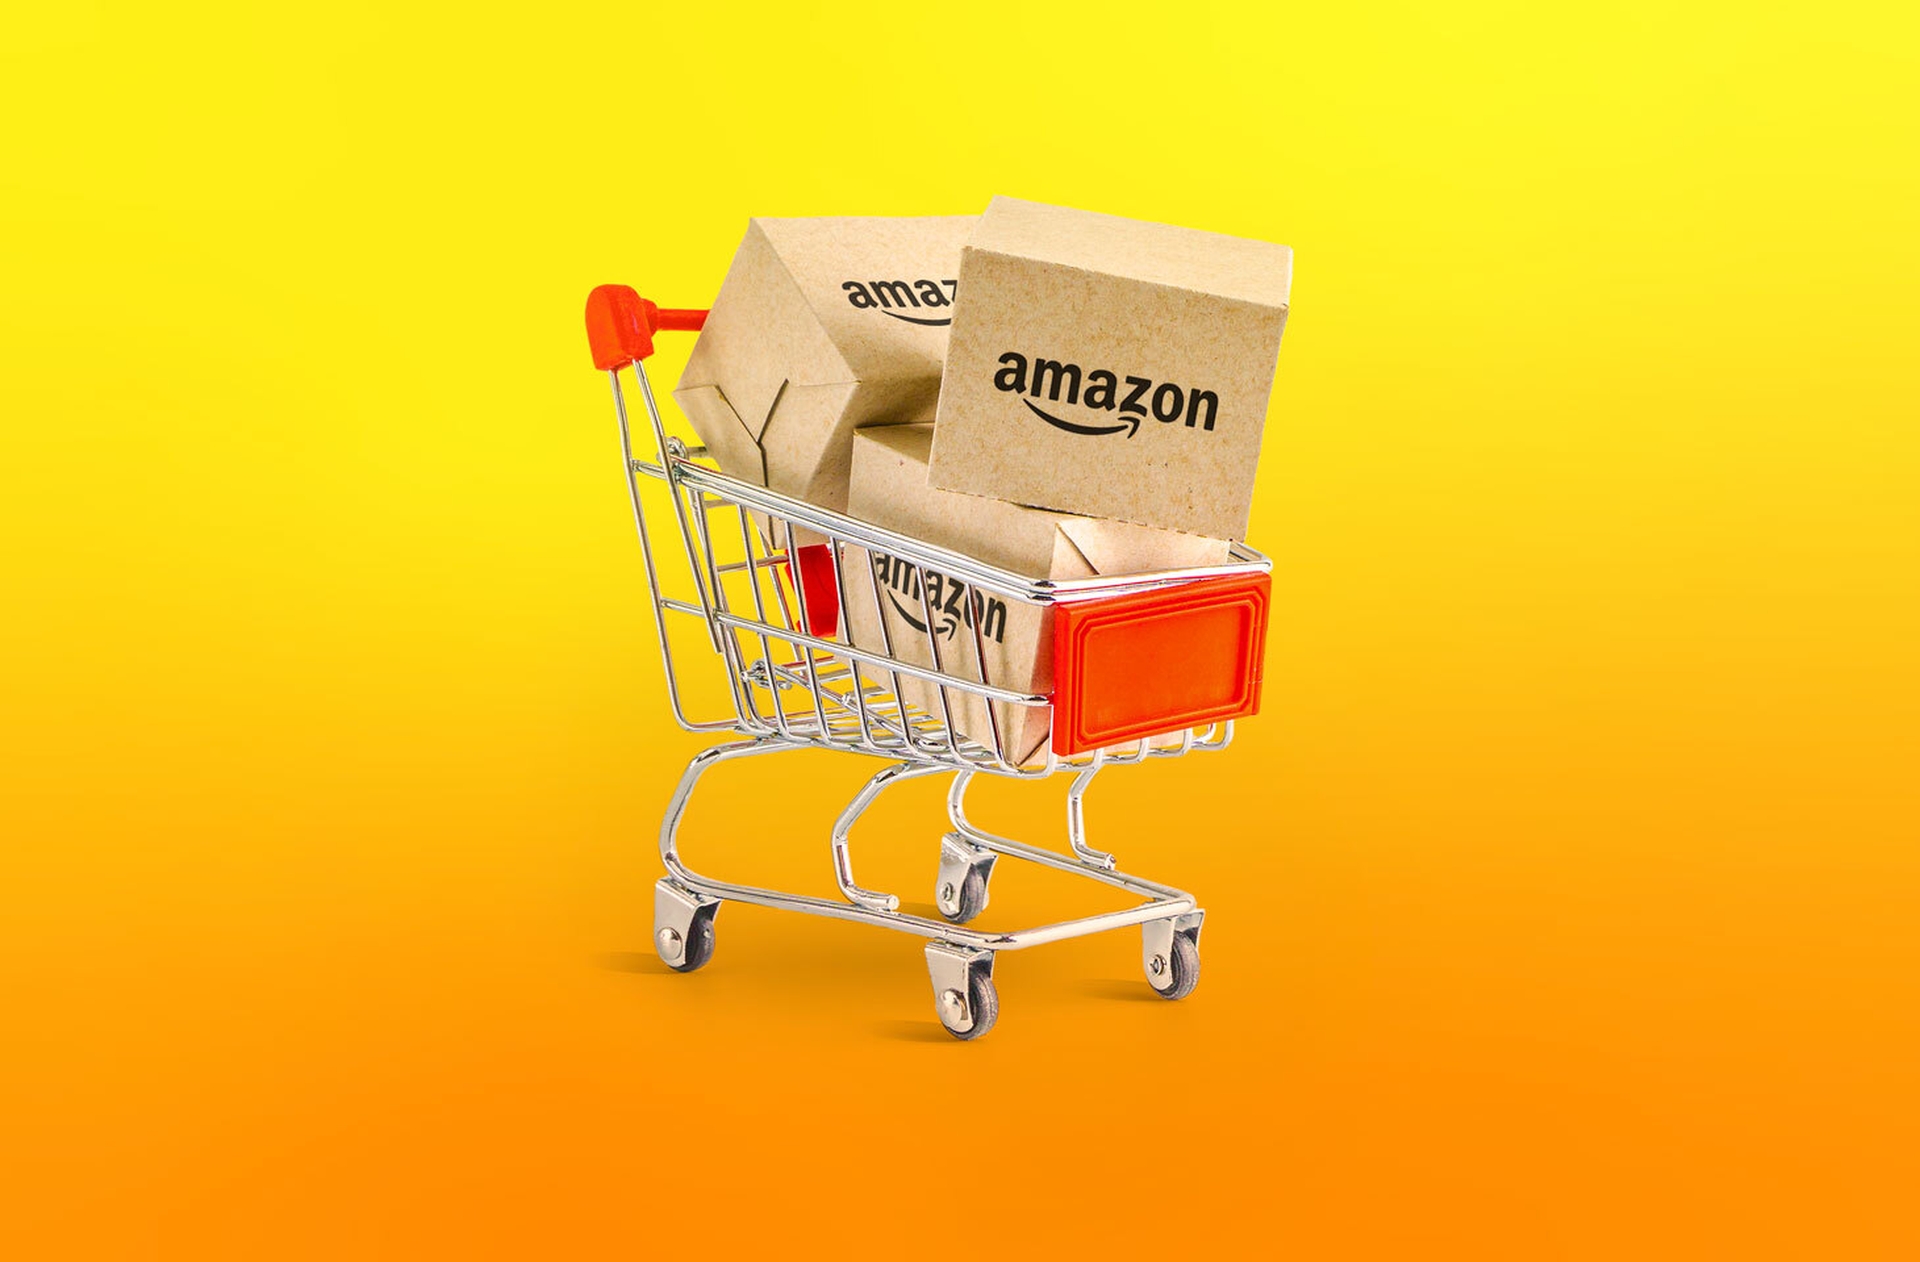 In this article, we are going to be going over how to logout from Amazon app, so you can safely log out of the shopping site on any device.